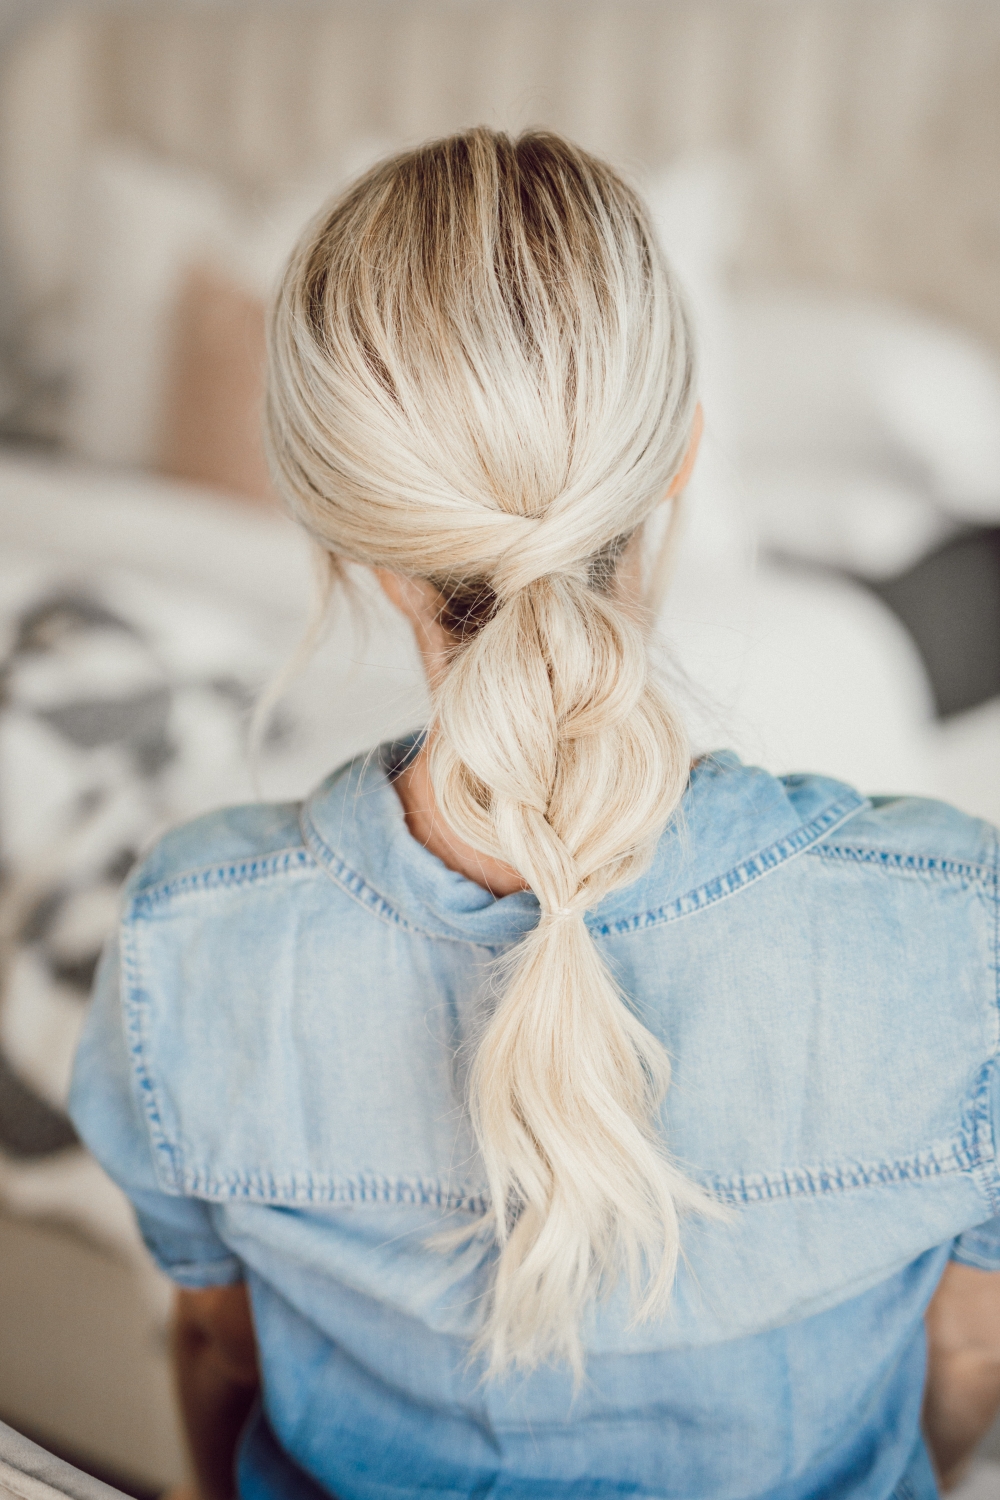 PONYTAIL hairstyles for Spring and Summer